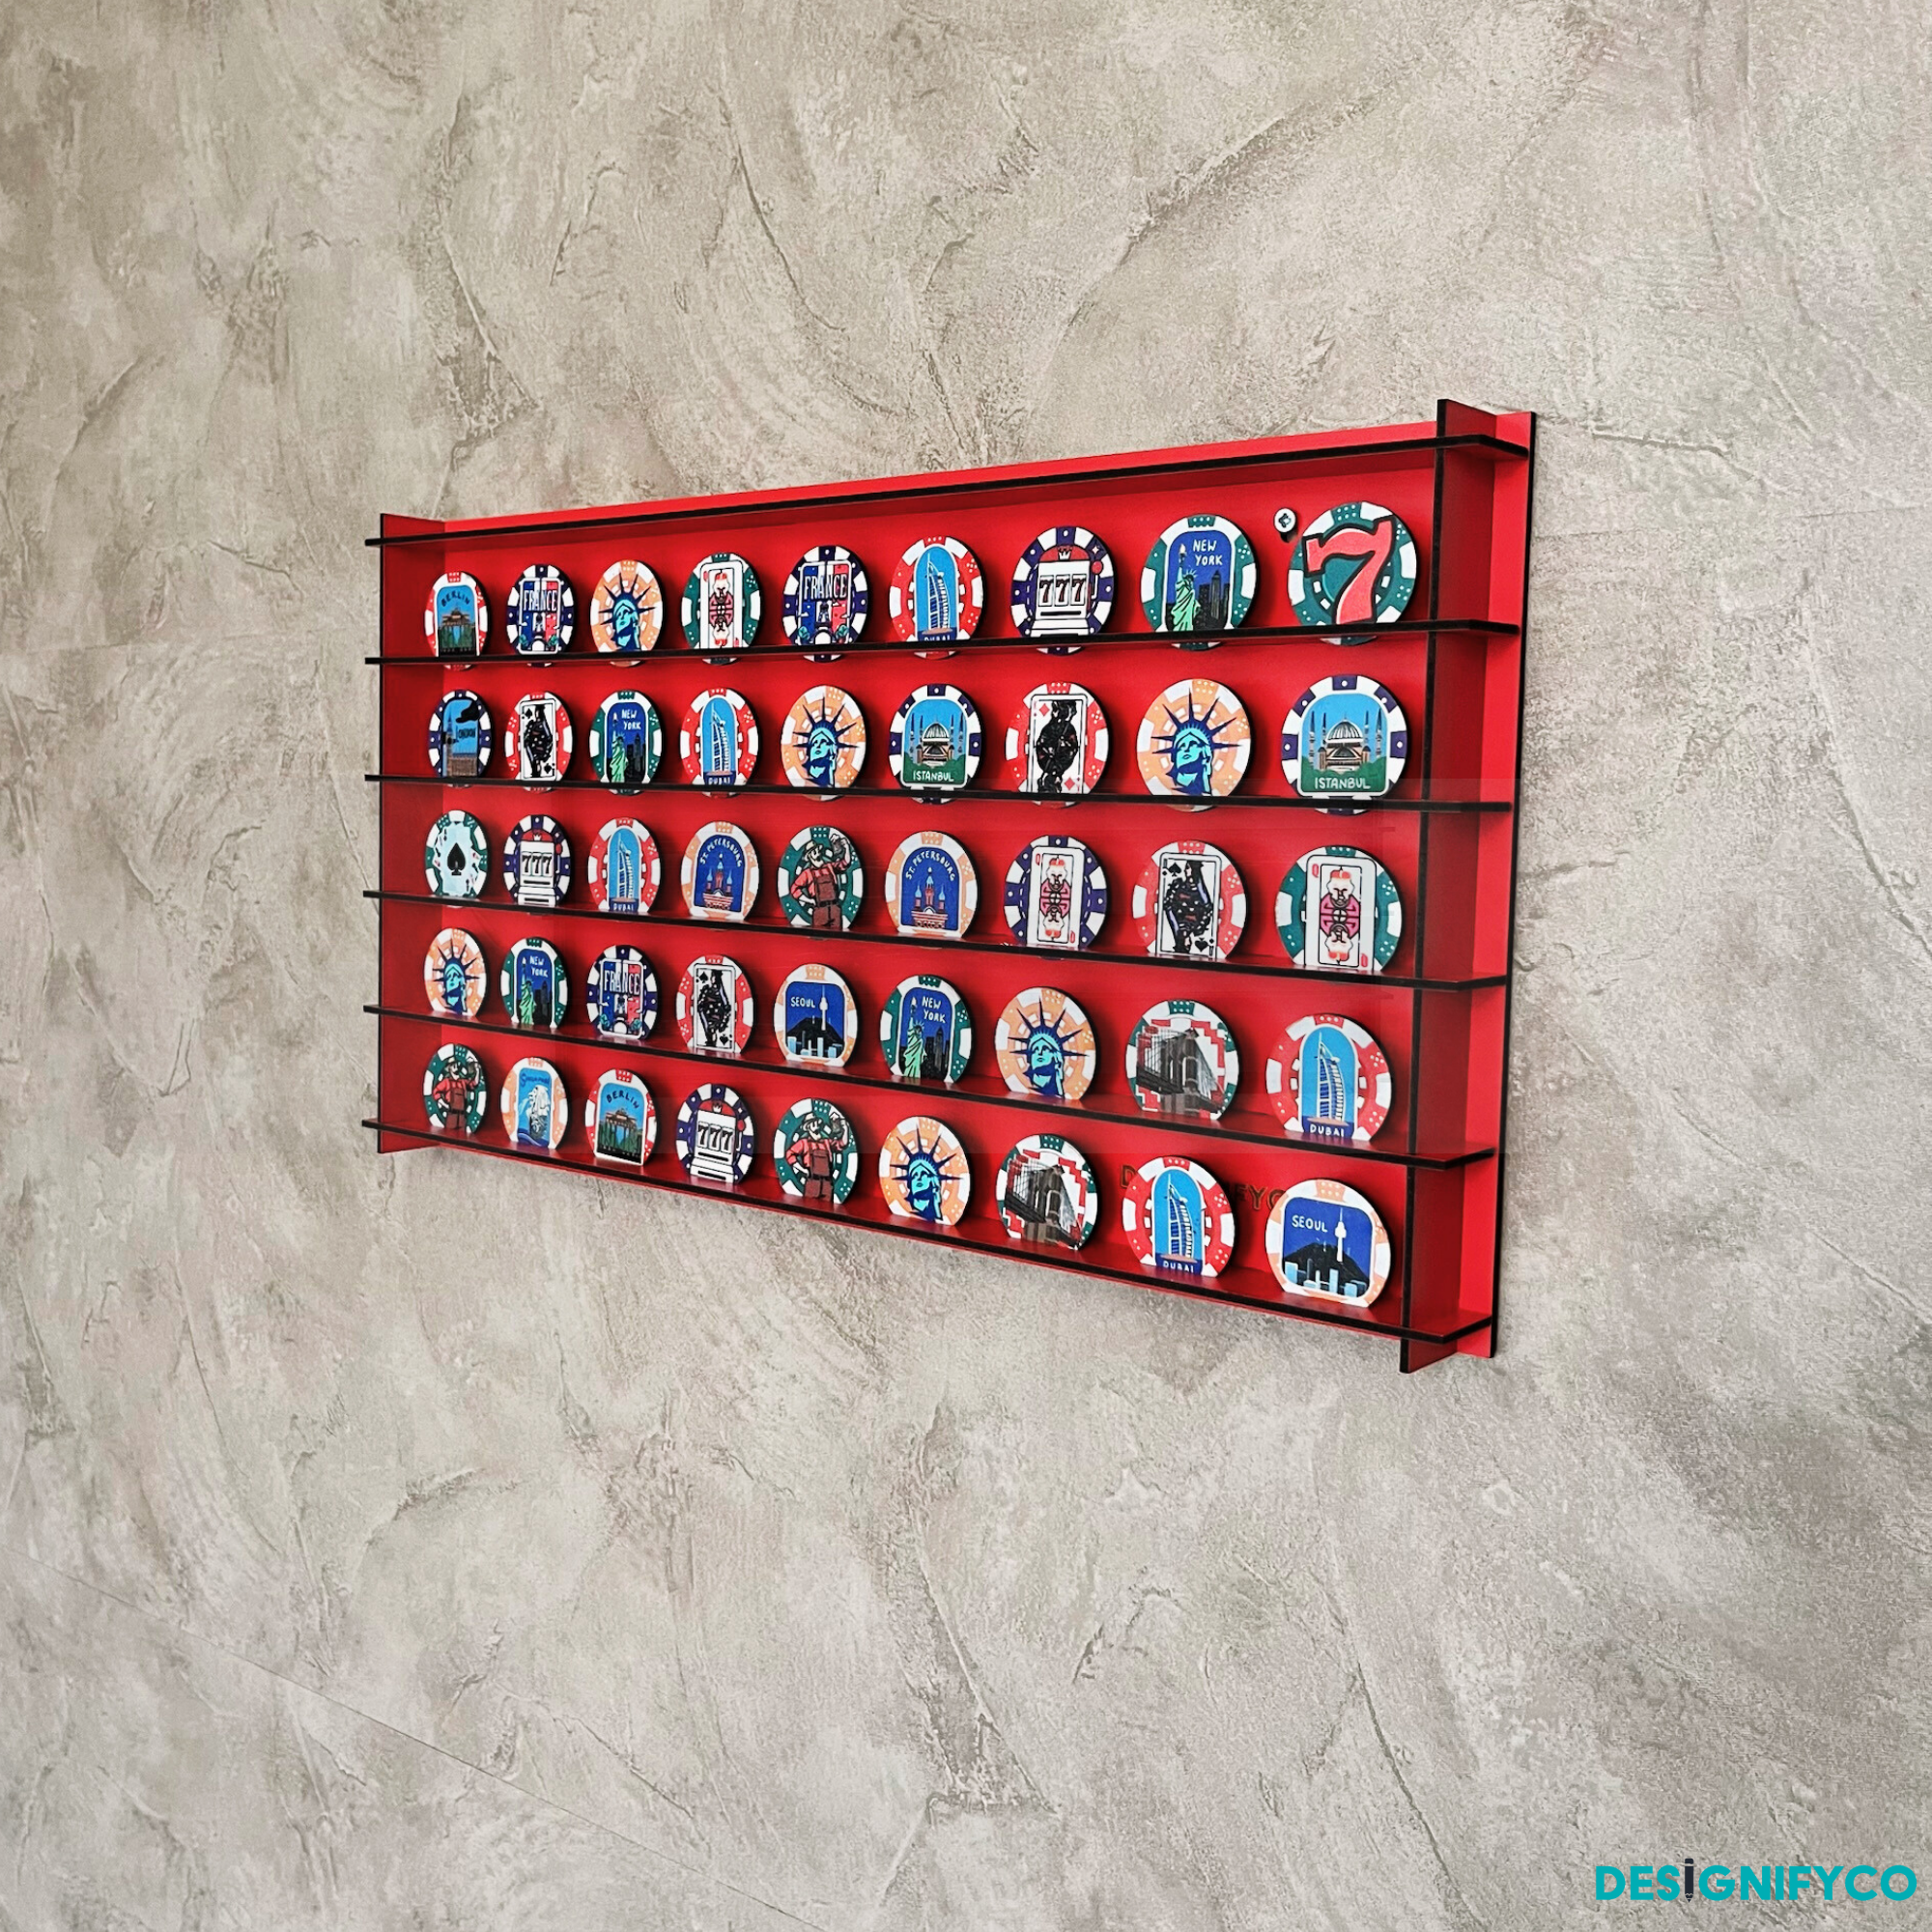 RED Casino Chips 45 Display Case